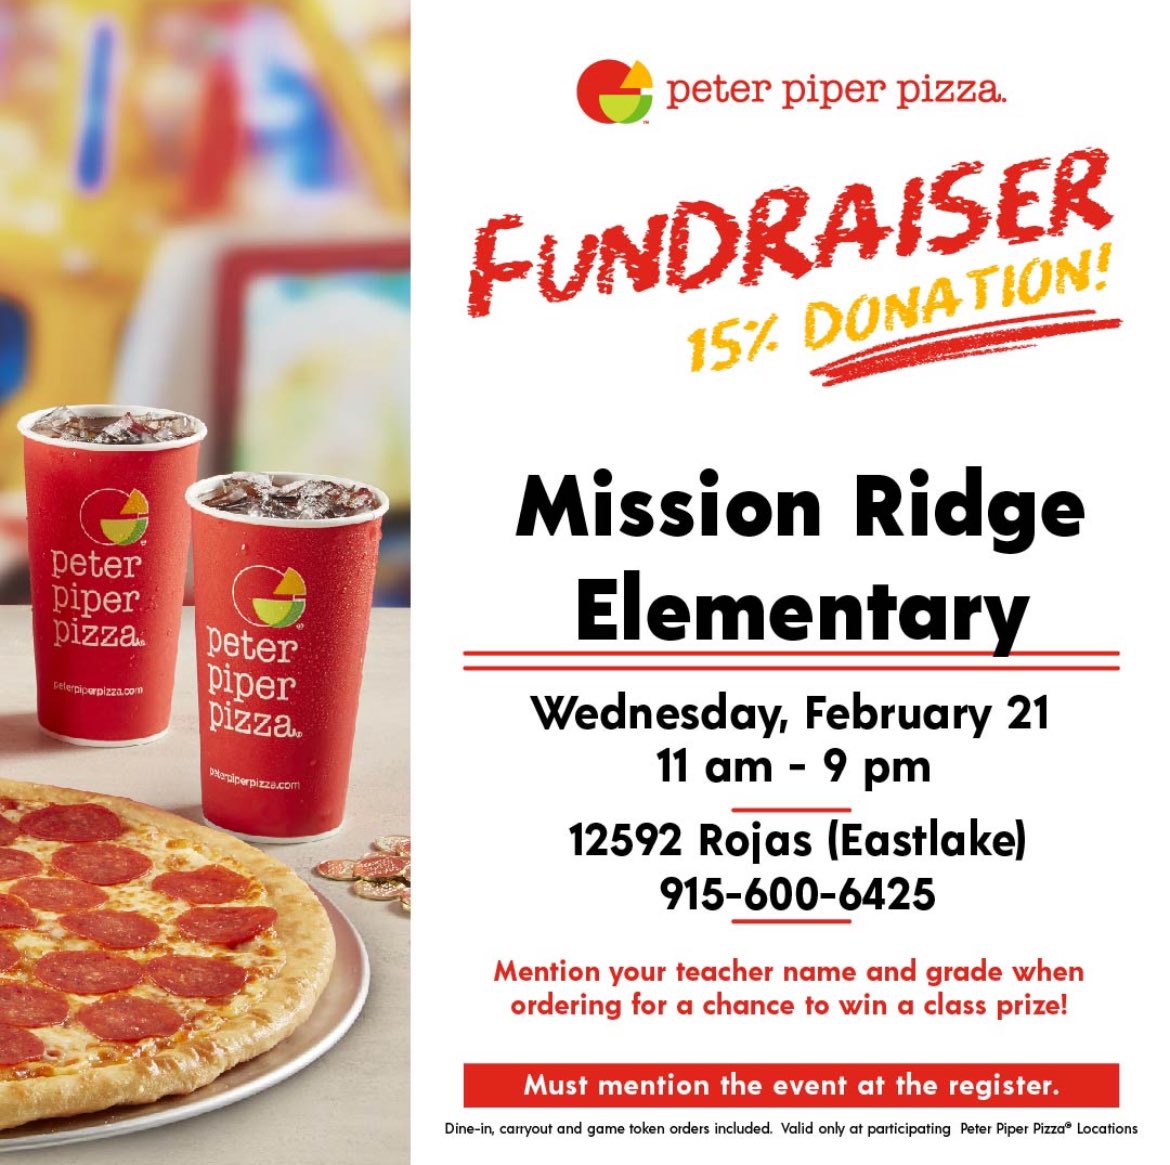 HOOT! HOOT! HOOT! Who wants to skip the cooking on Wednesday this week? 🙋🏻‍♀️
Join us in supporting our MRES Owls at Peter Piper Pizza! 🦉
#ManyMindsOneMission 
#TeachLikeAChamp 
#VoxCorVita